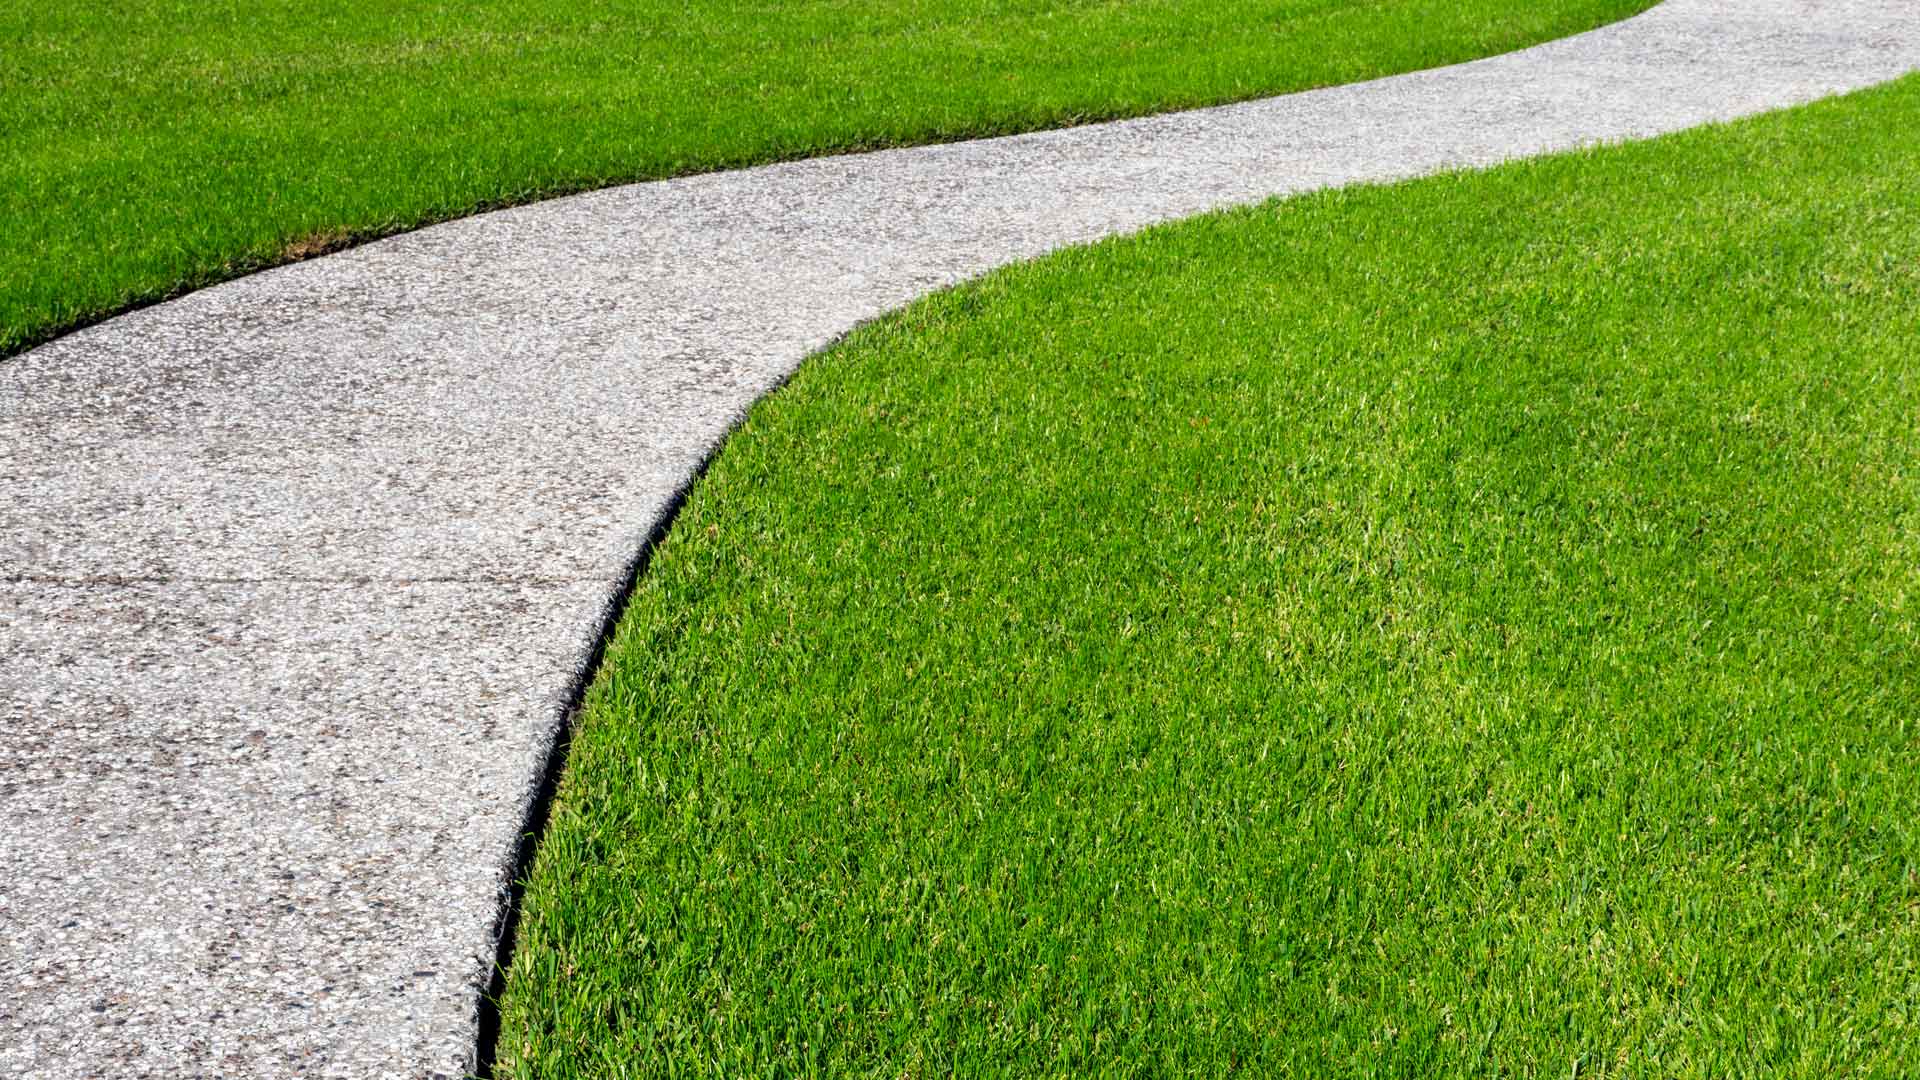 What Is the Best Weed Control Schedule for Lawns With Zoysia Grass?